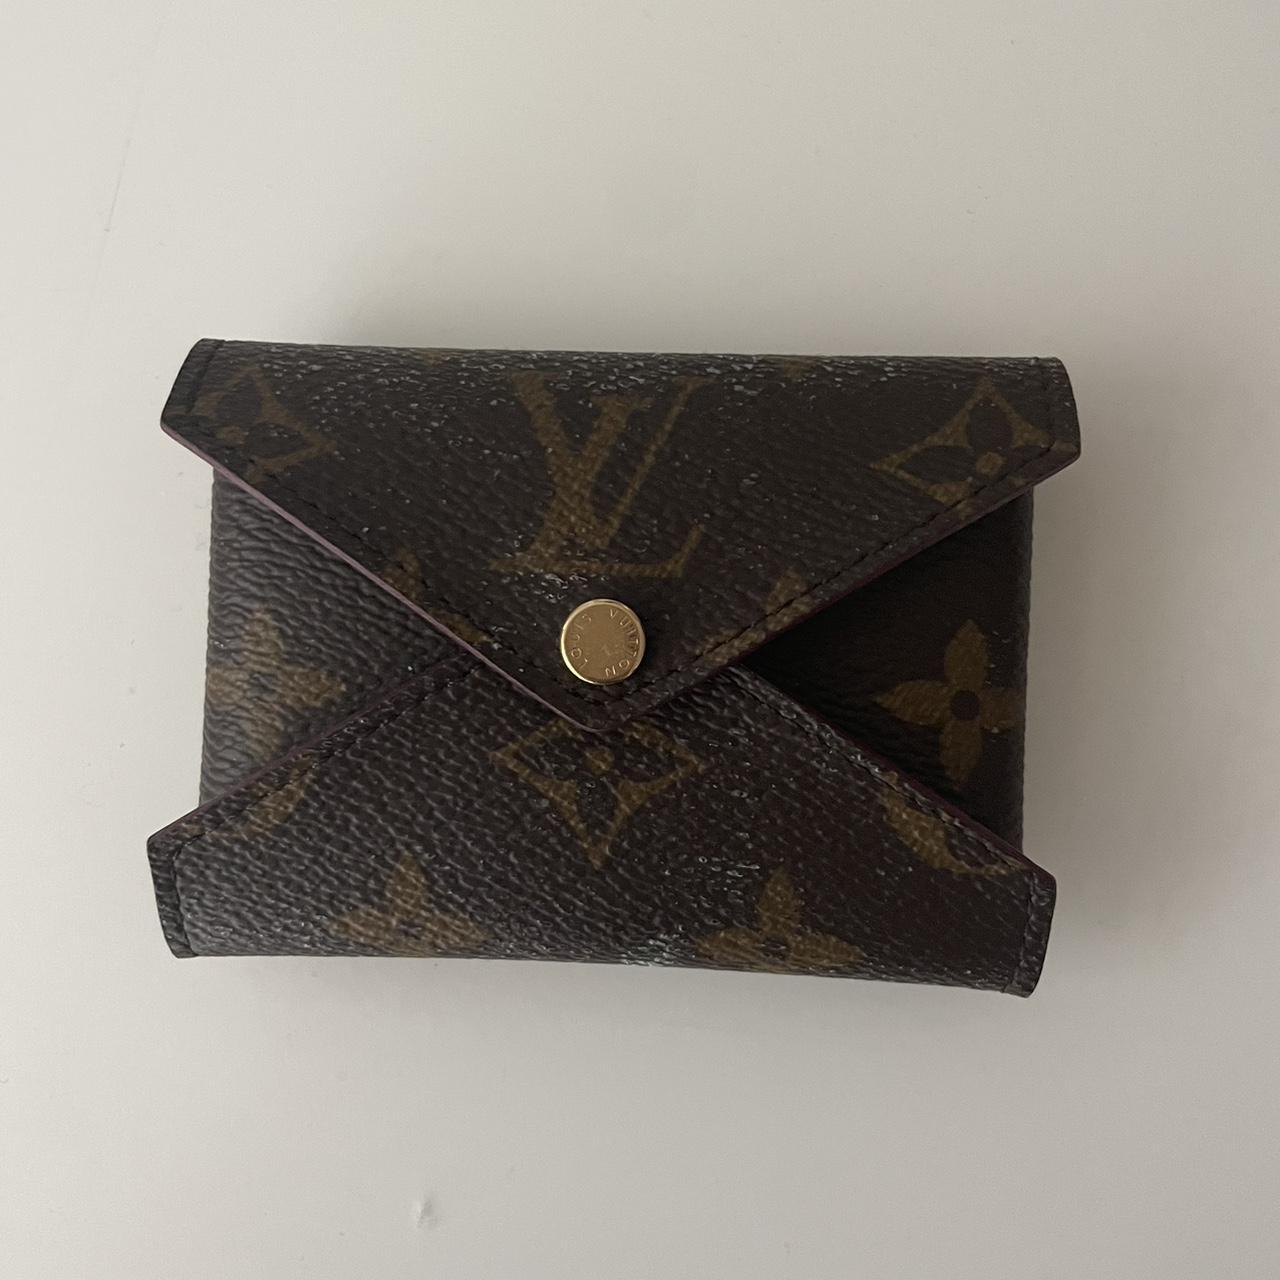 Louis Vuitton Kirigami pouchette from Spring in the - Depop